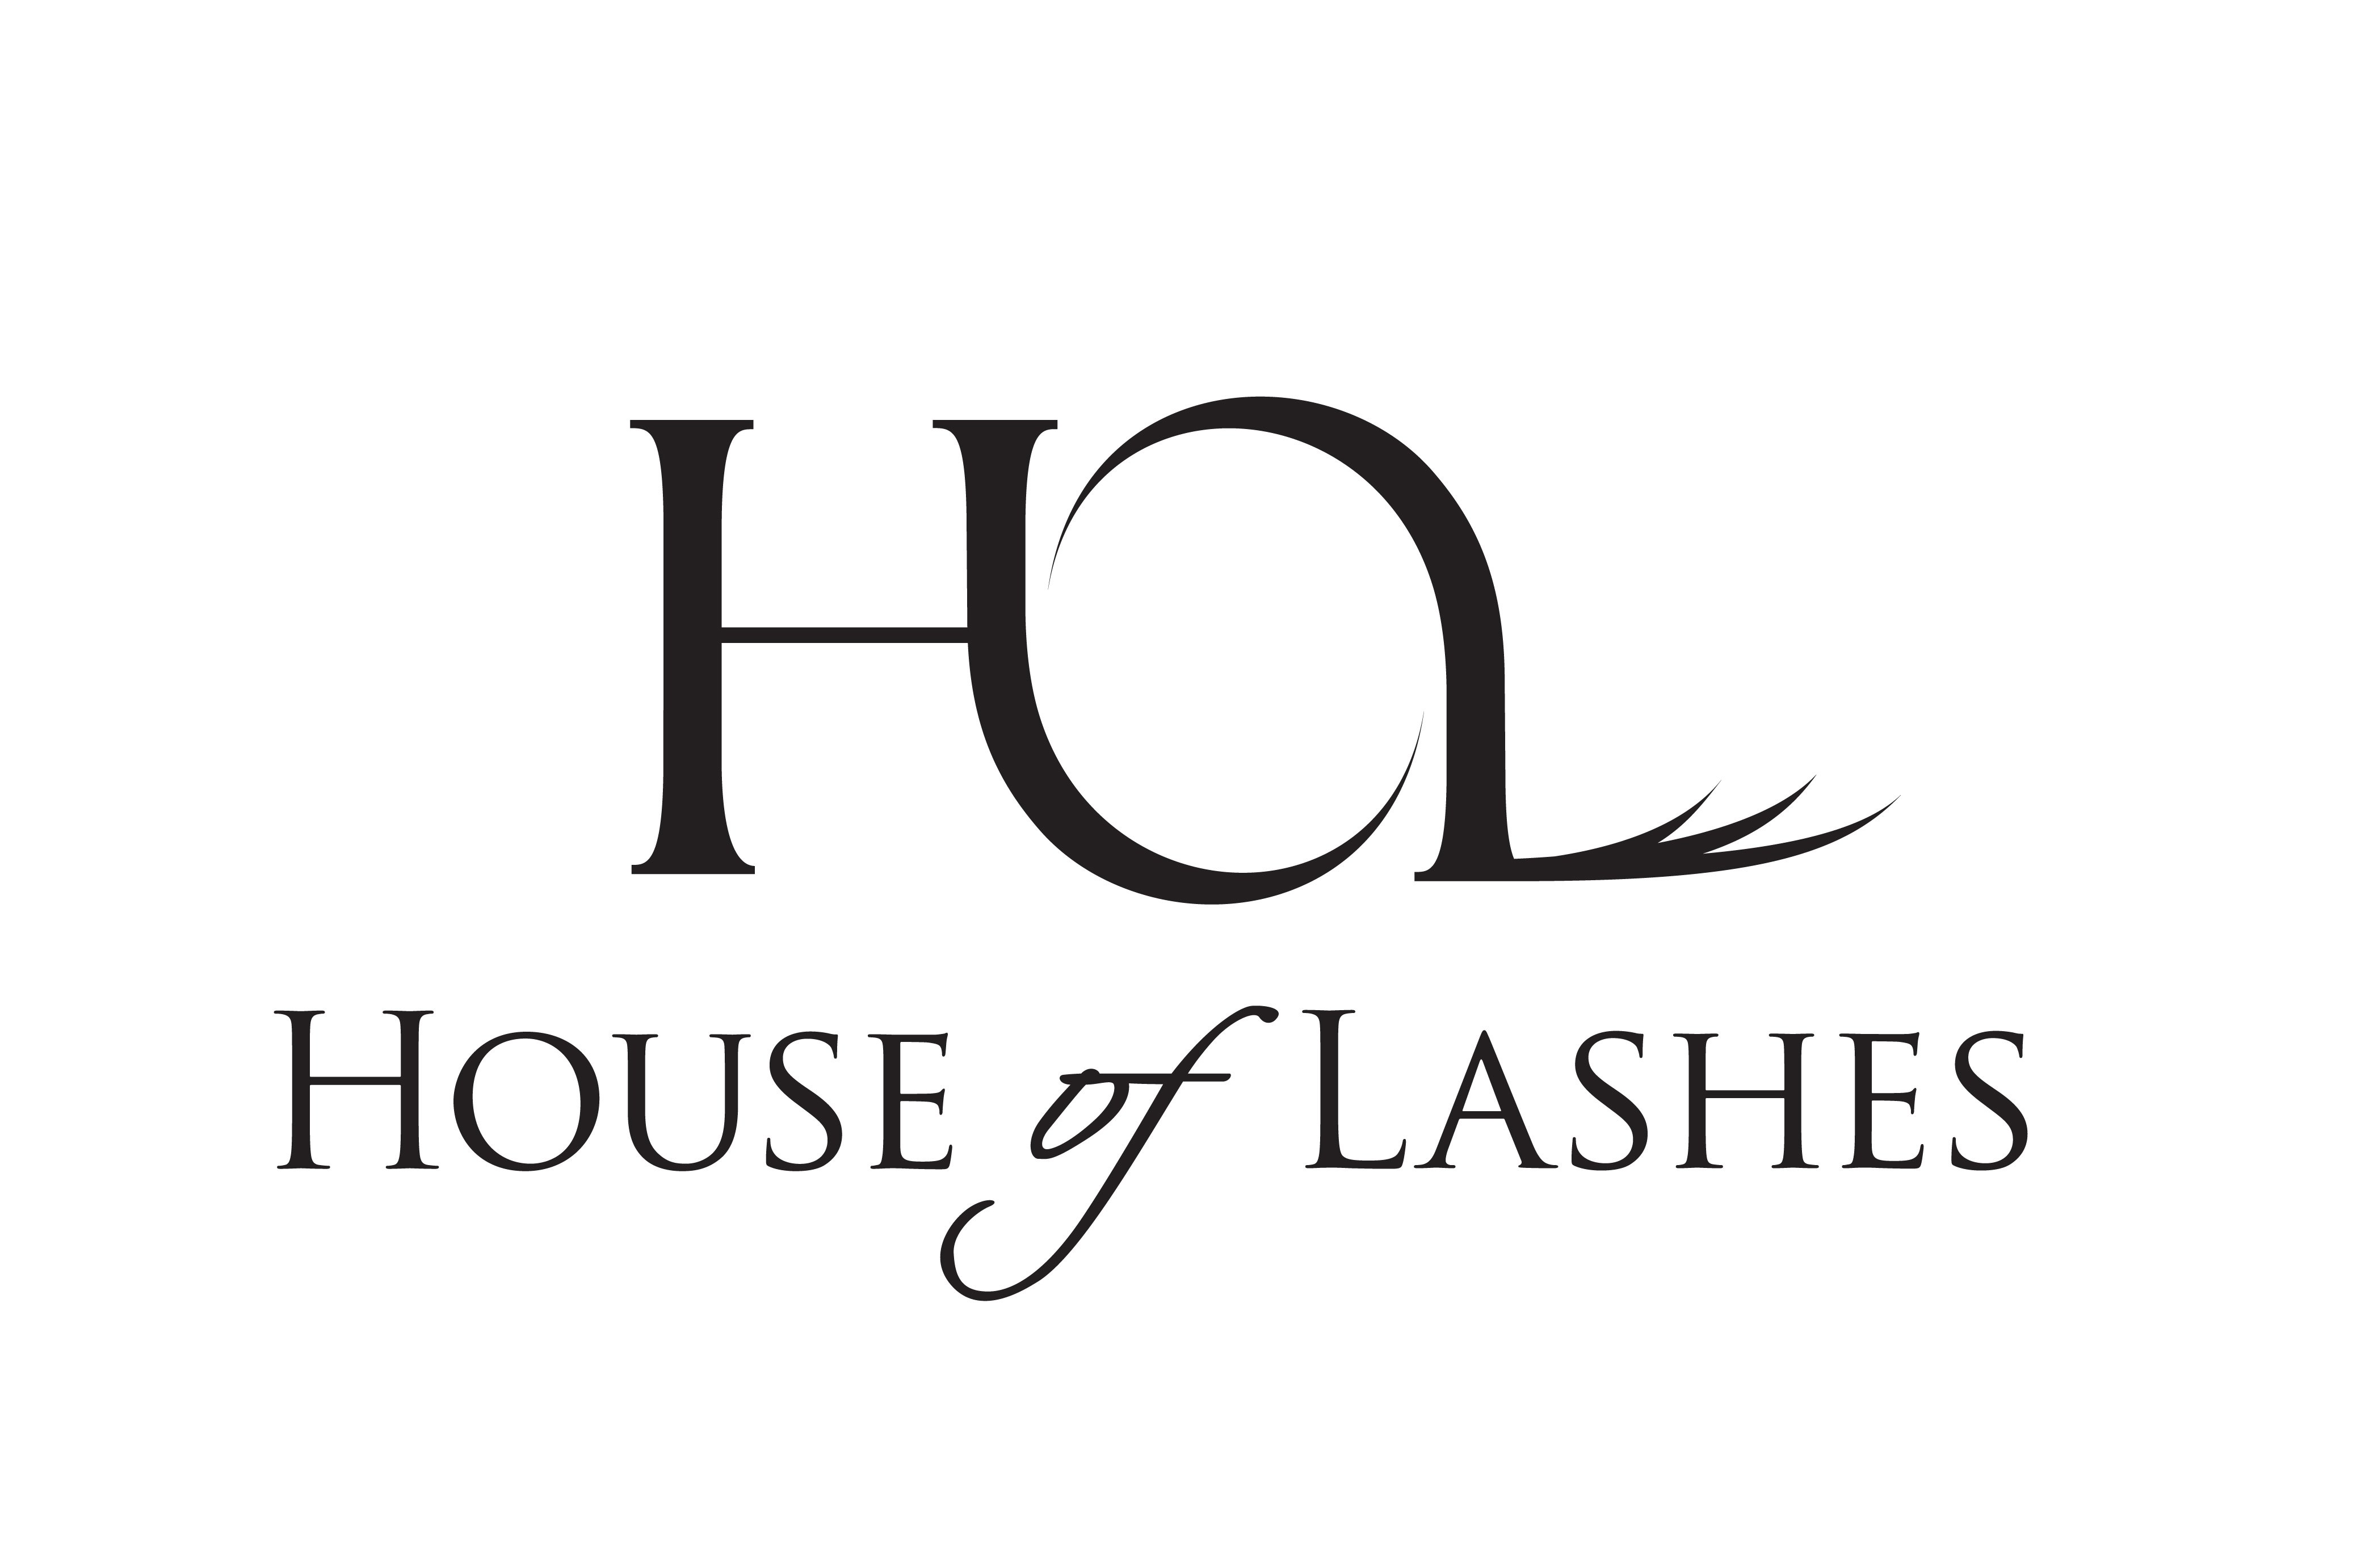  HOL HOUSE OF LASHES